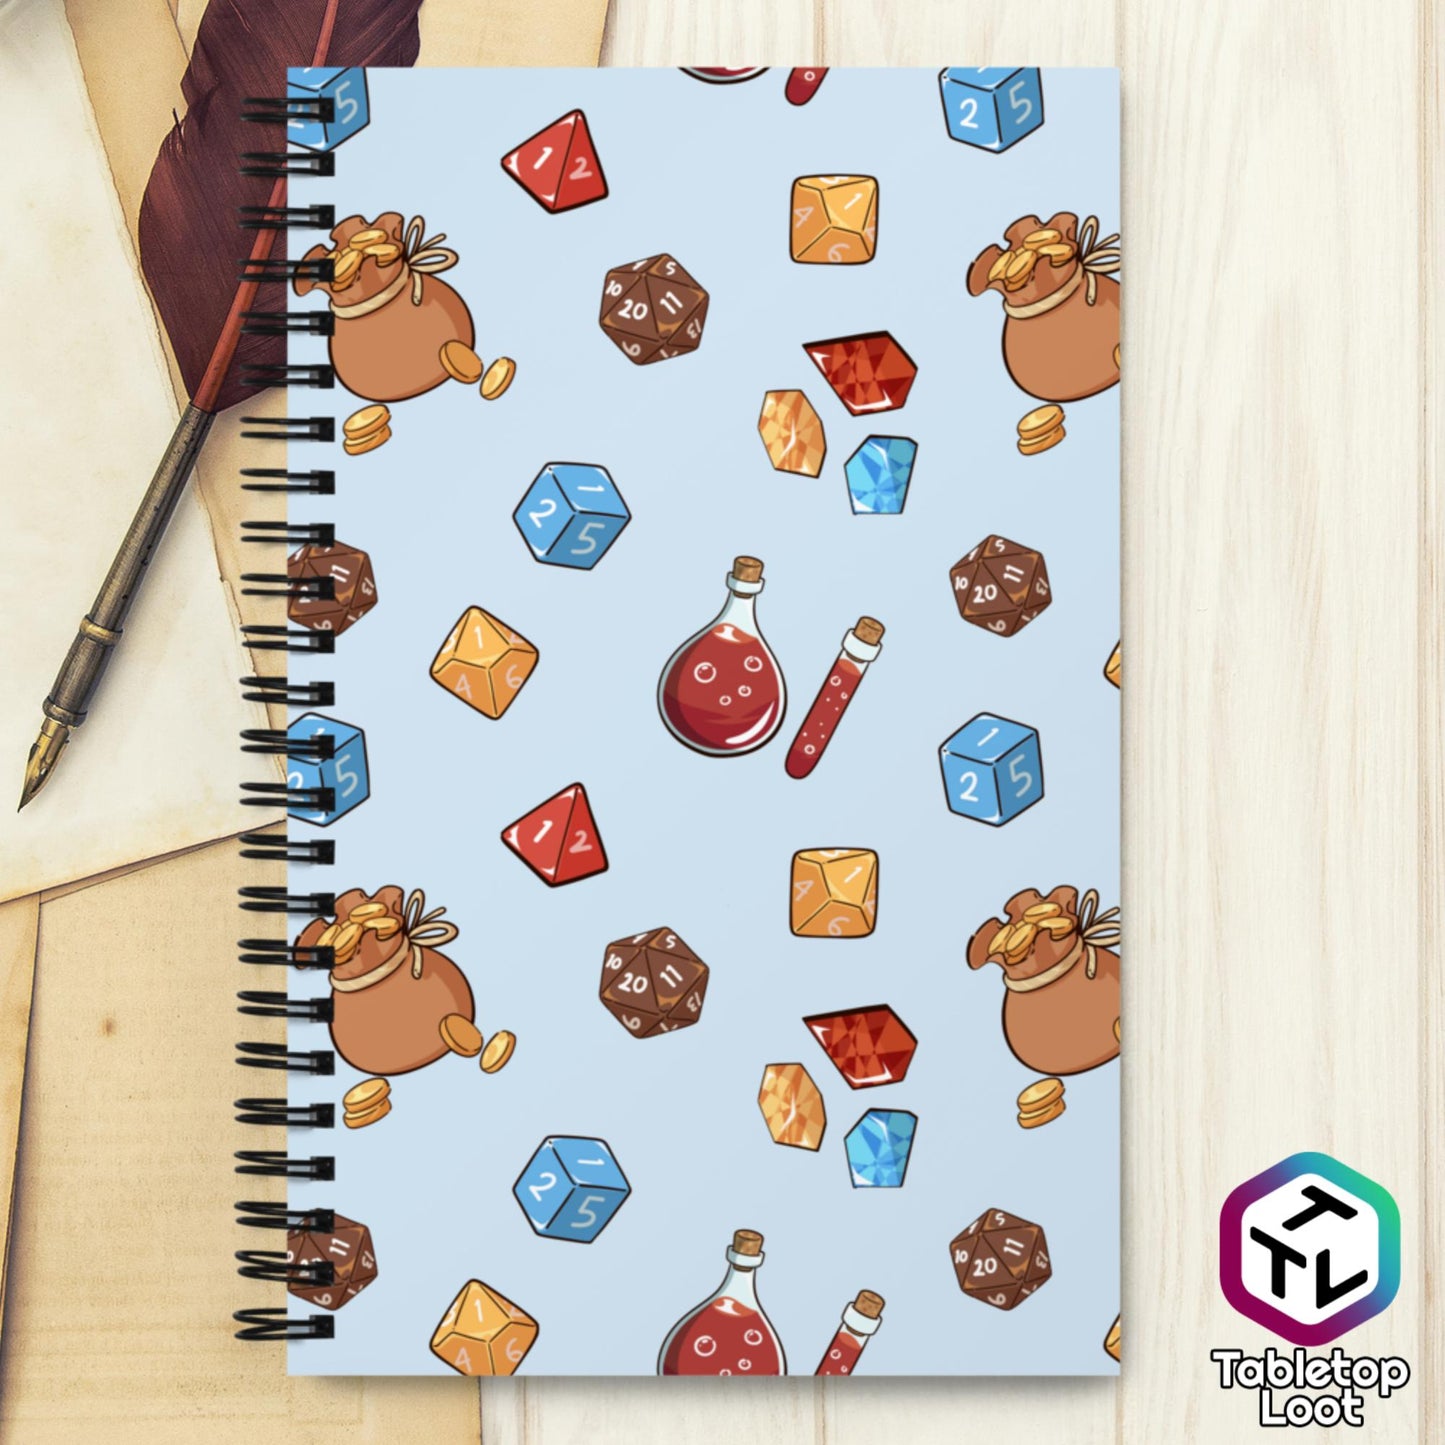 A spiral notebook from Tabletop Loot with a pattern of dice, gems, potions, and sacks of gold on a blue background.